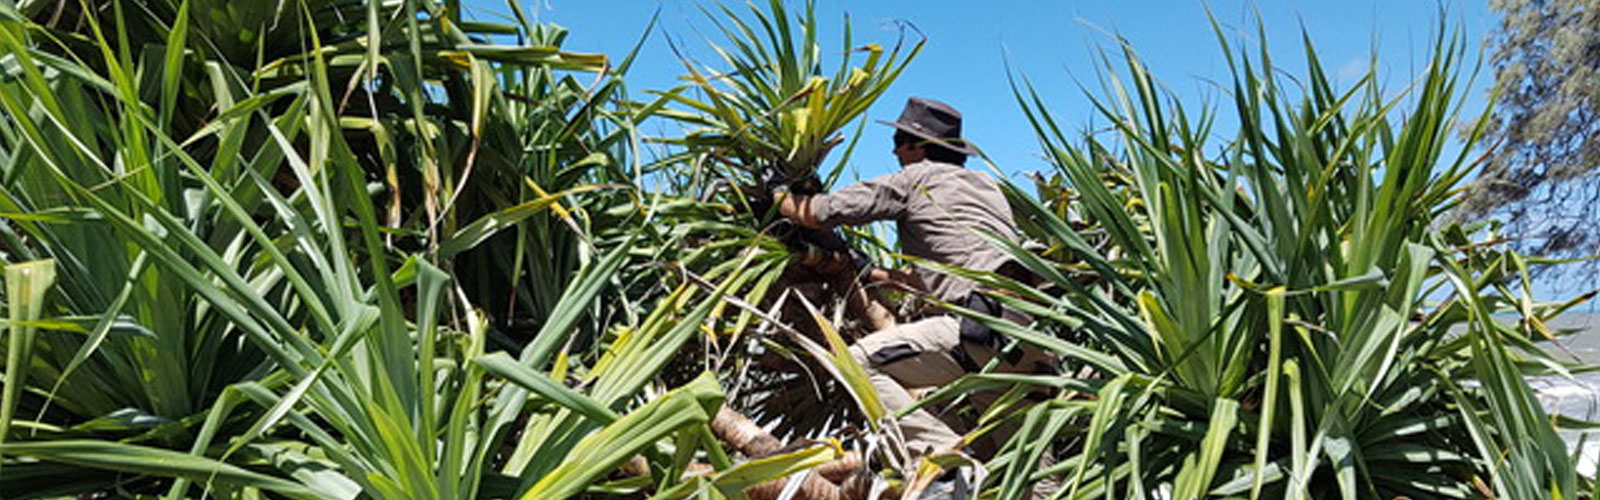 Protecting Noosa’s Pandanus with science, collaboration and action